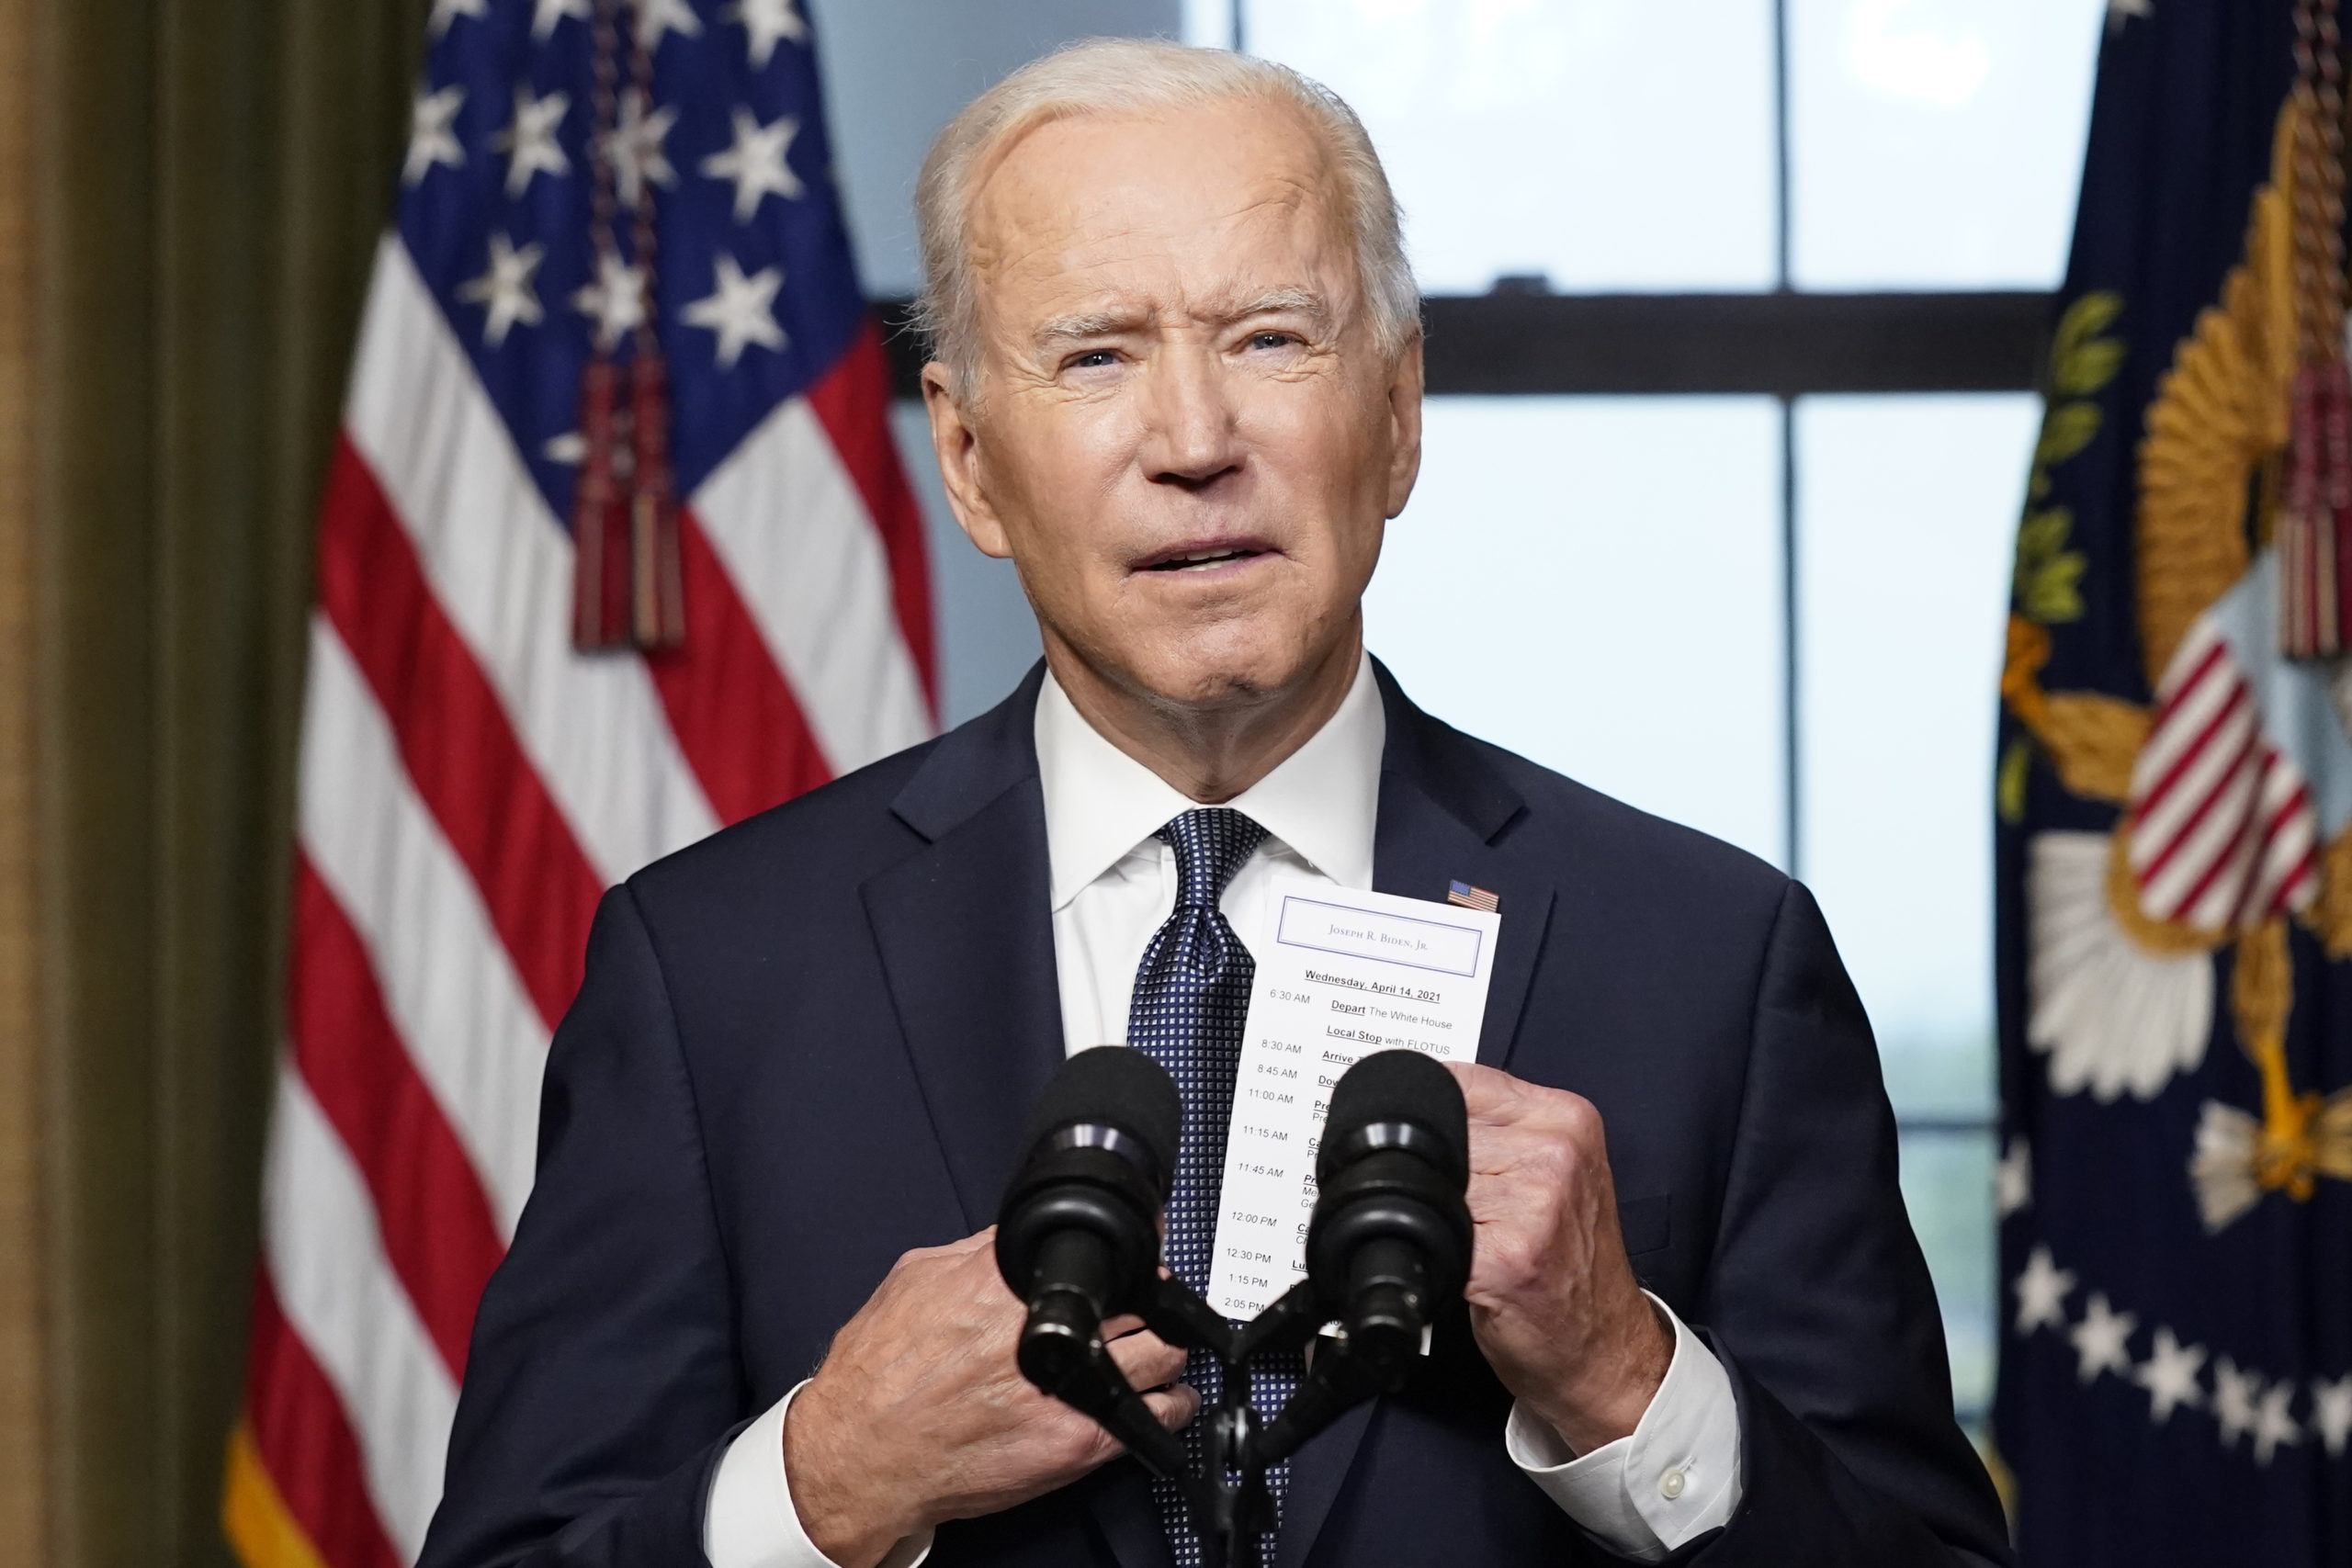 U.S. President Joe Biden pulls a note card from his pocket as he speaks from the Treaty Room in the White House about the withdrawal of U.S. troops from Afghanistan on April 14, 2021 in Washington, DC. President Biden announced his plans to pull all remaining U.S. troops out of Afghanistan by September 11, 2021 in a final step towards ending America’s longest war. (Photo by Andrew Harnik-Pool/Getty Images)